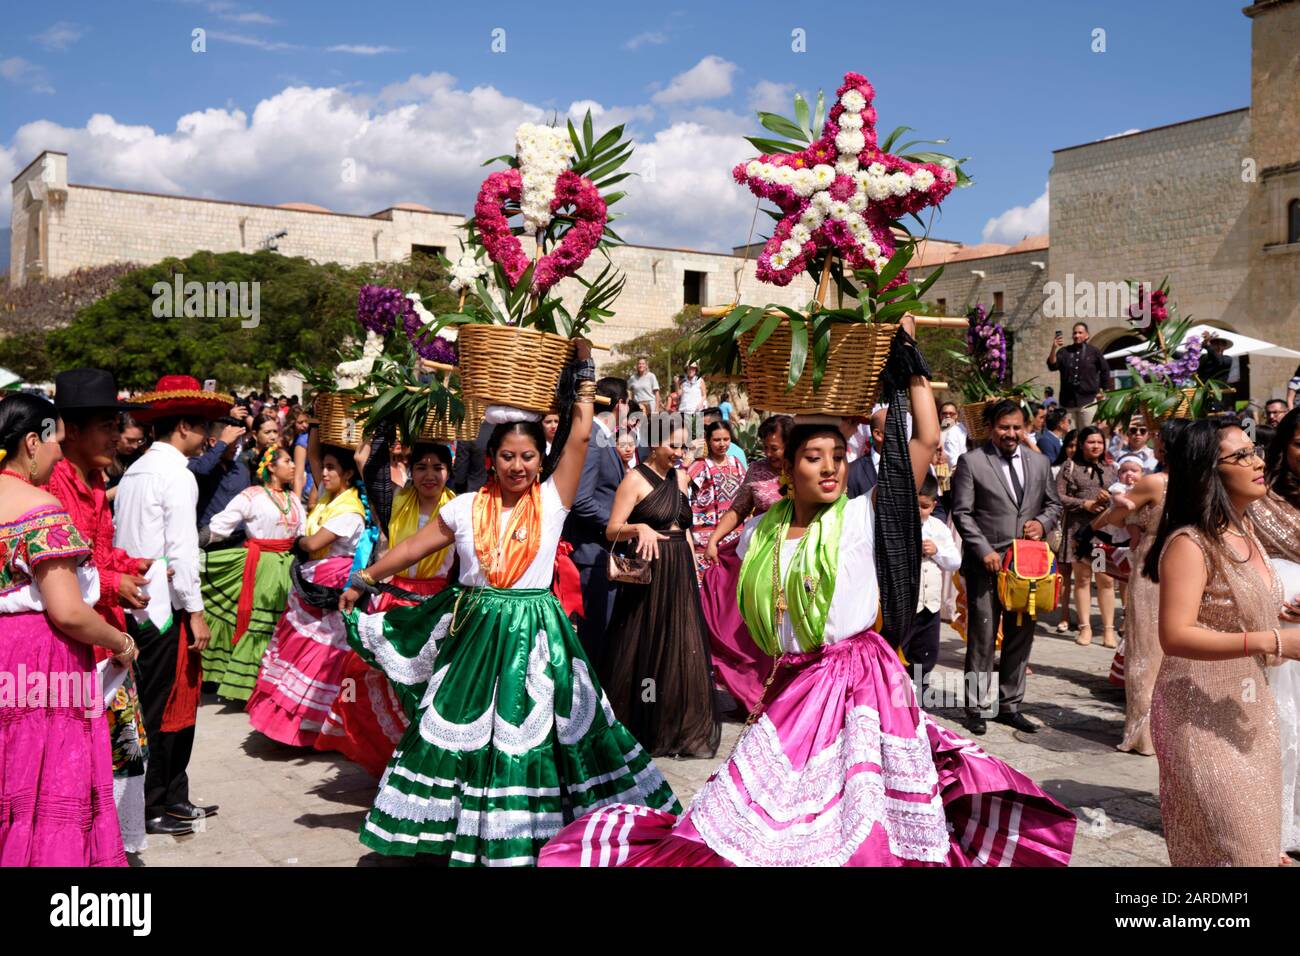 Woman dancing in flowing traditional outfit with flower basket Part of  Traditional wedding parade (Calenda de Bodas) on the streets of Oaxaca  Stock Photo - Alamy